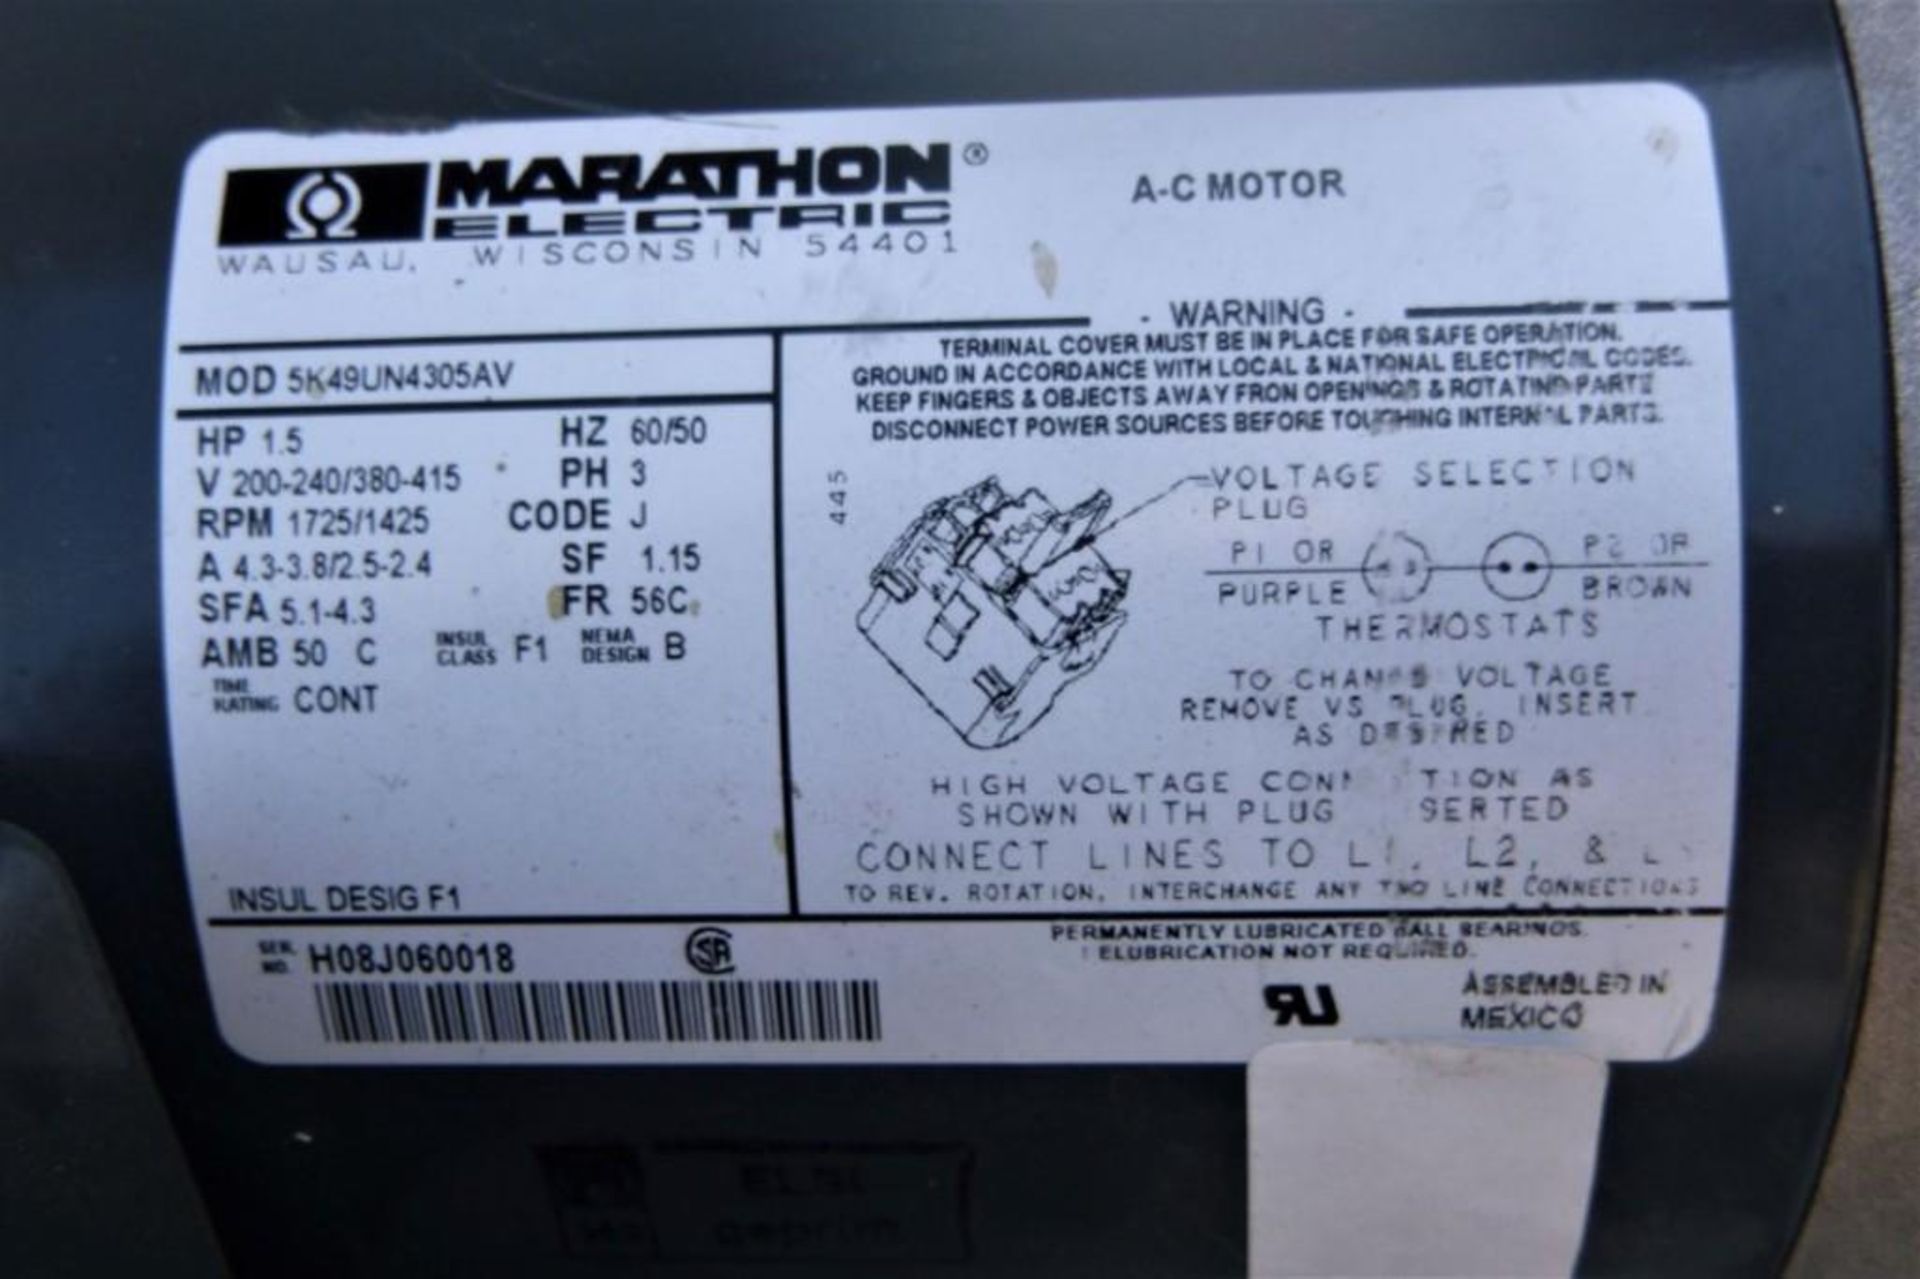 Motor, 1.5 HP, Marathon, 1725/1425 RPM Out, #C744064 (Loading Cost = $30) - Image 4 of 4